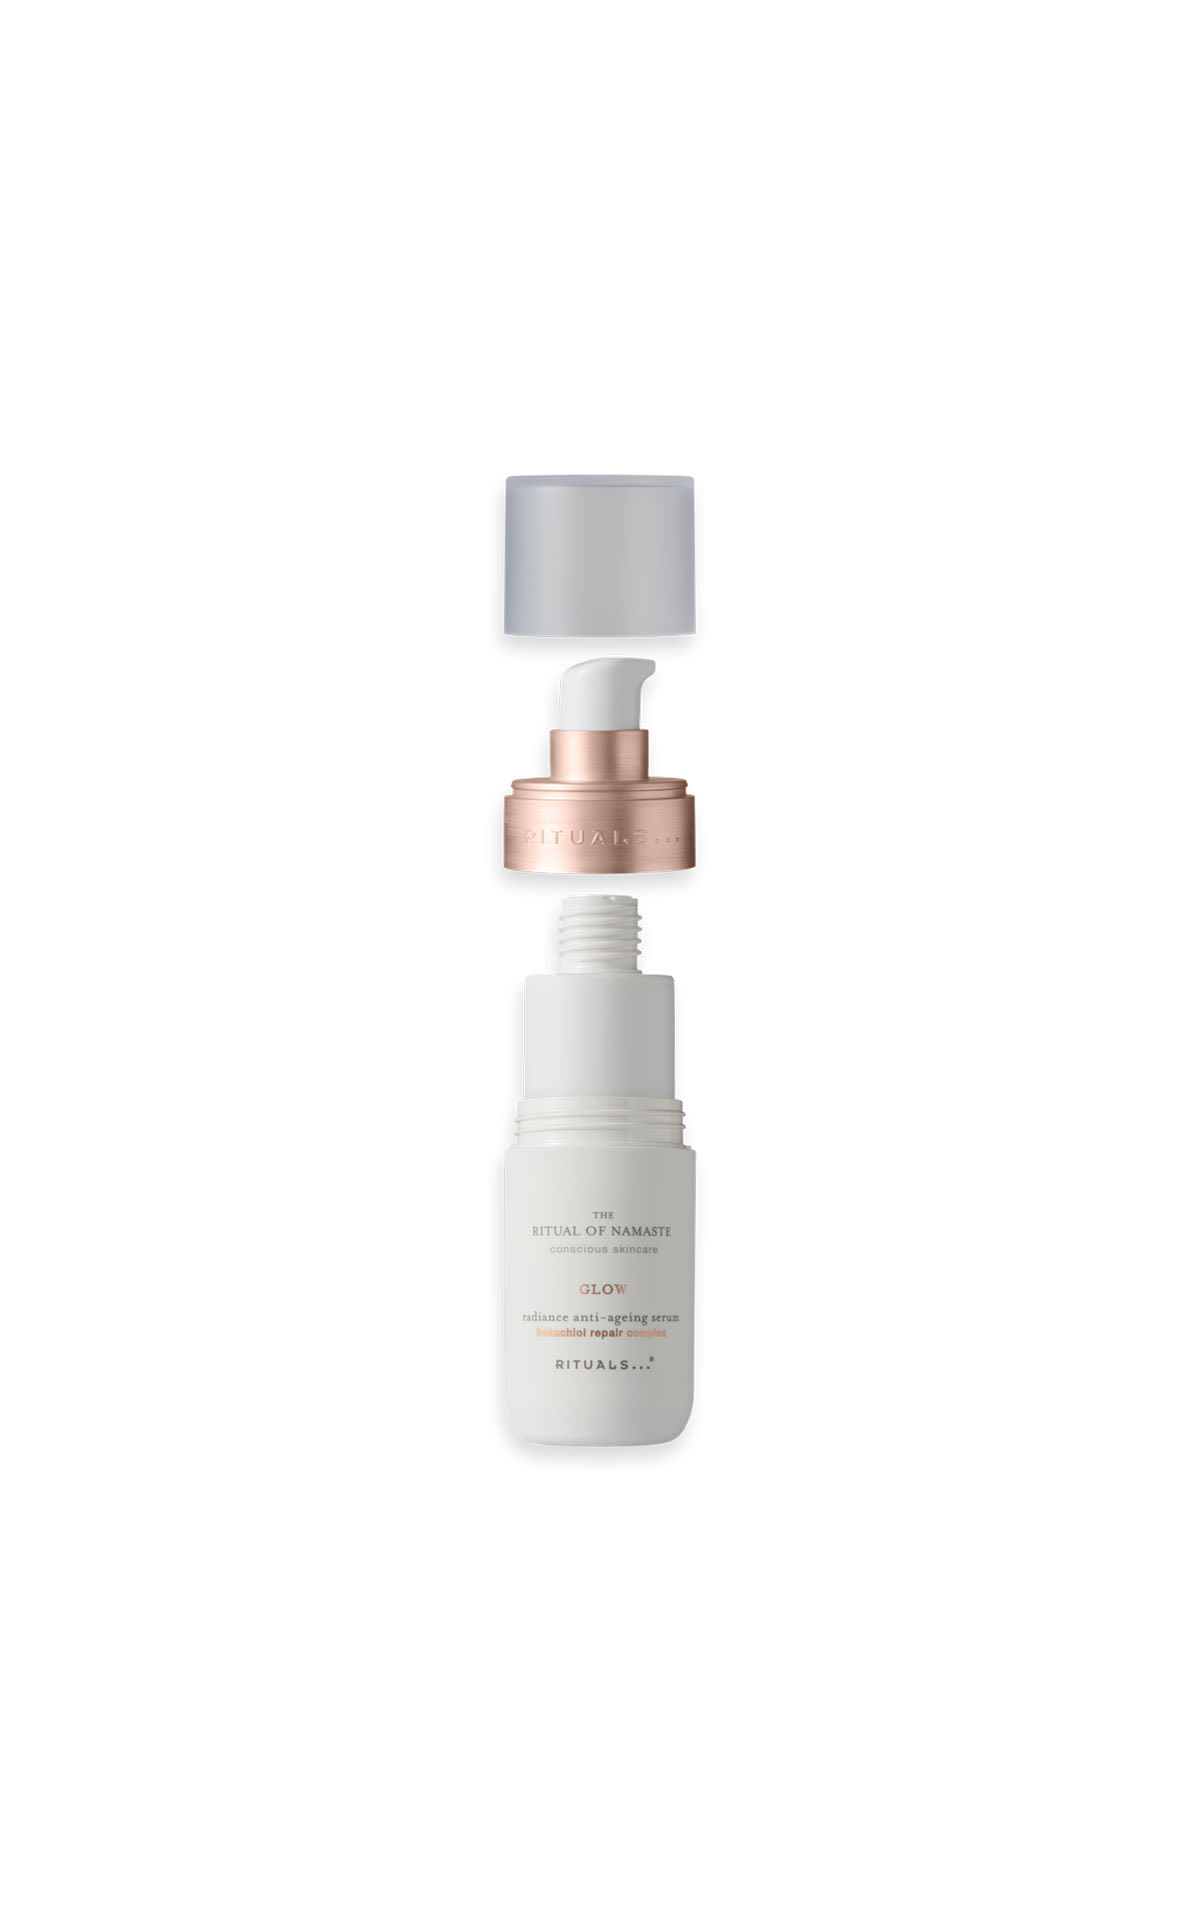 Rituals The ritual of namaste glow anti-ageing serum refill from Bicester Village